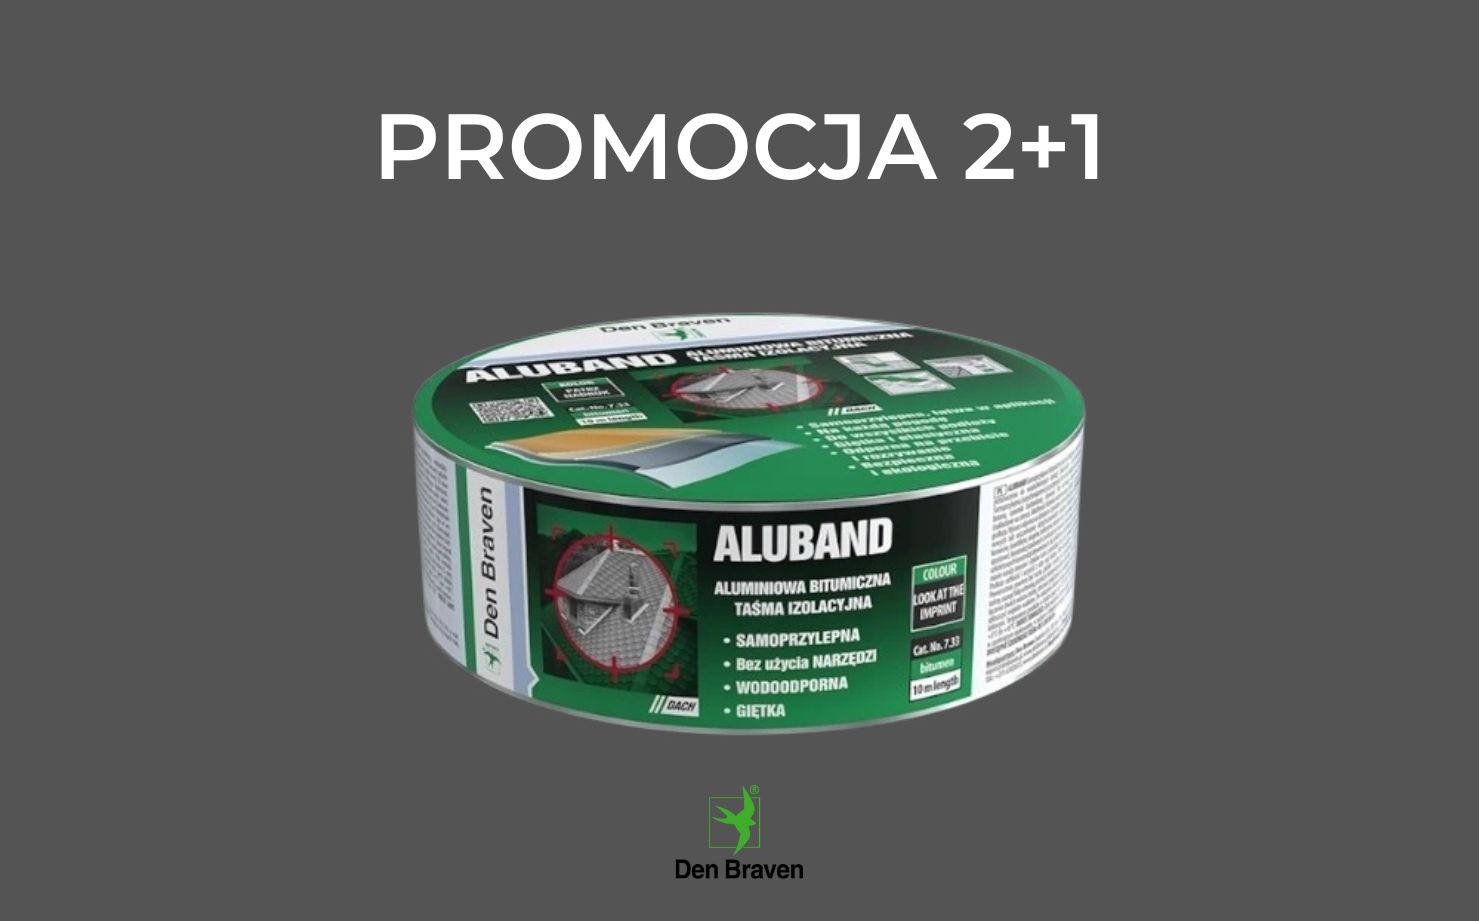 You are currently viewing PROMOCJA 2+1